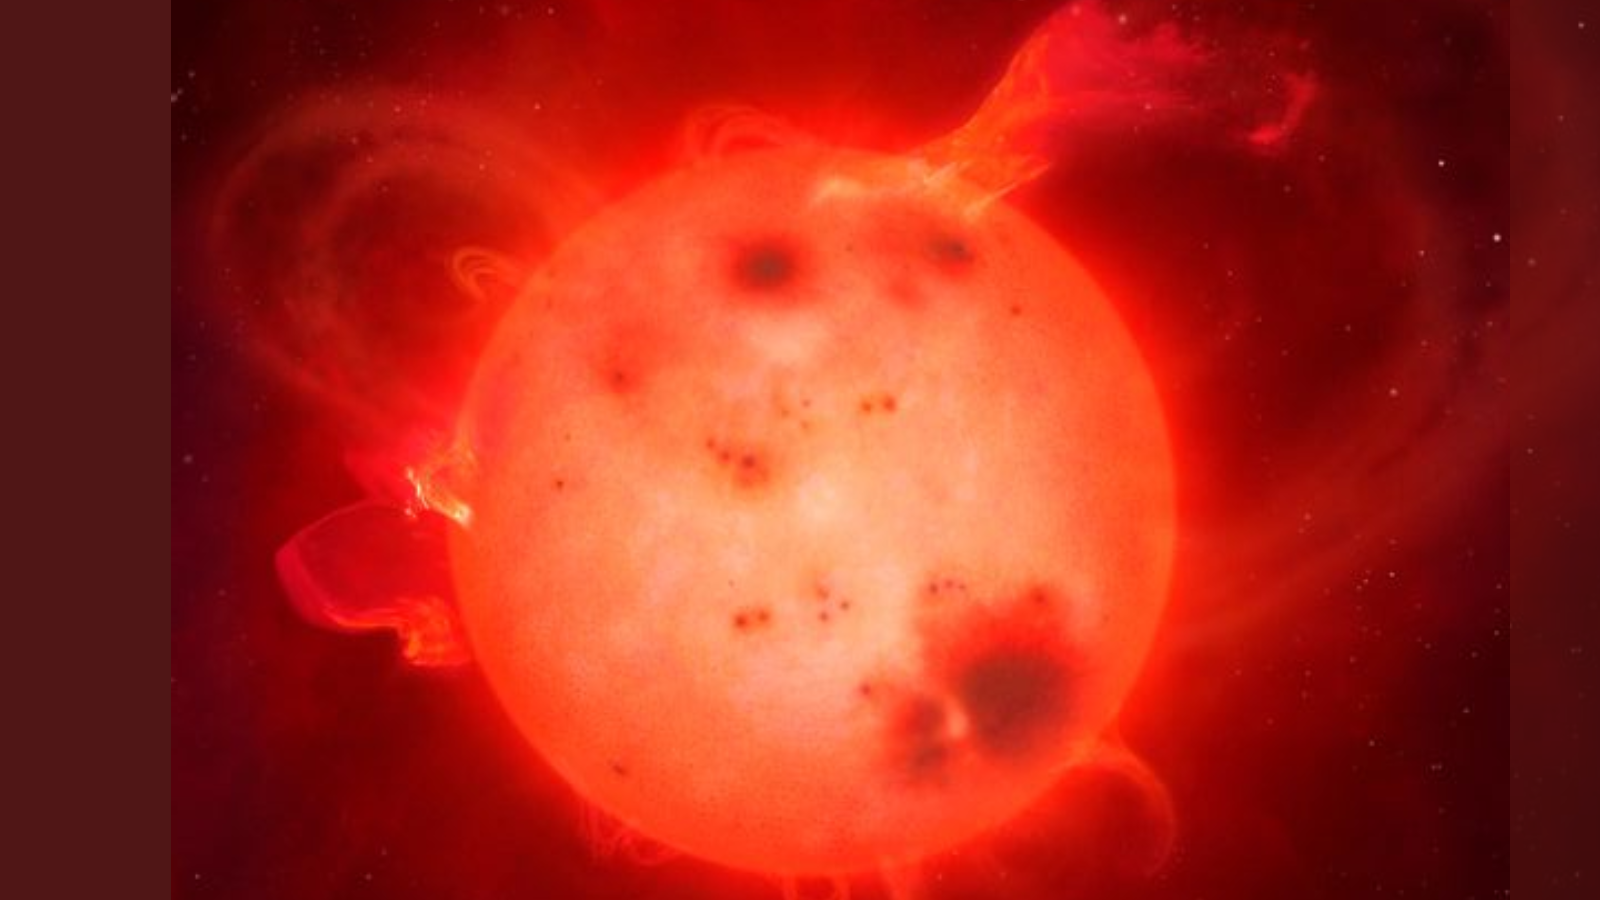 Stellar detectives find suspect for incredibly powerful ‘superflares’ Space